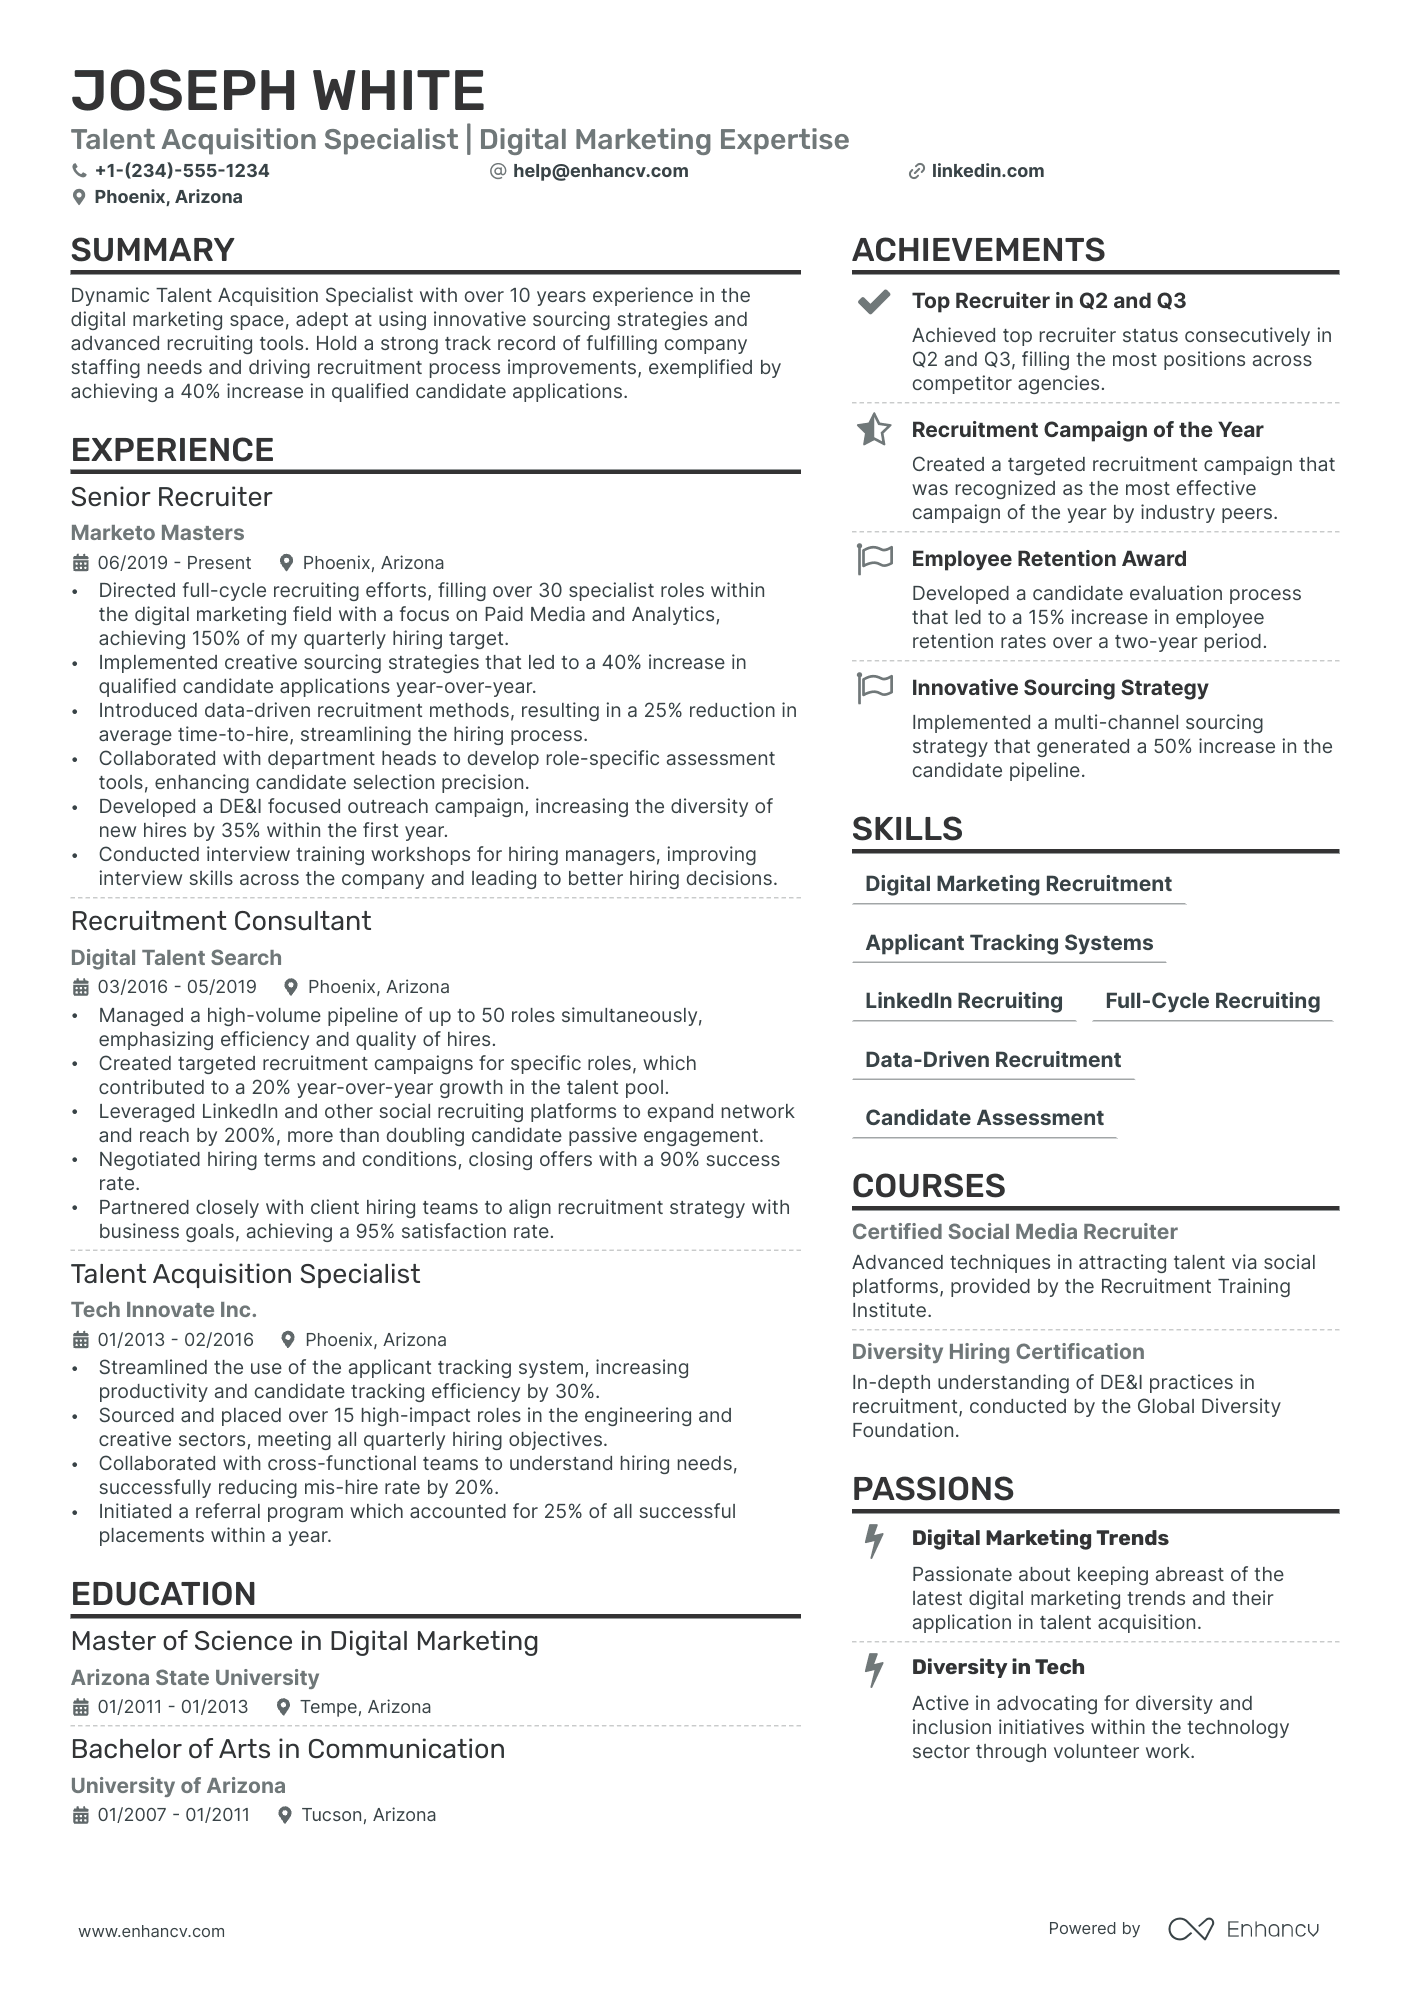 Talent Acquisition Manager resume example